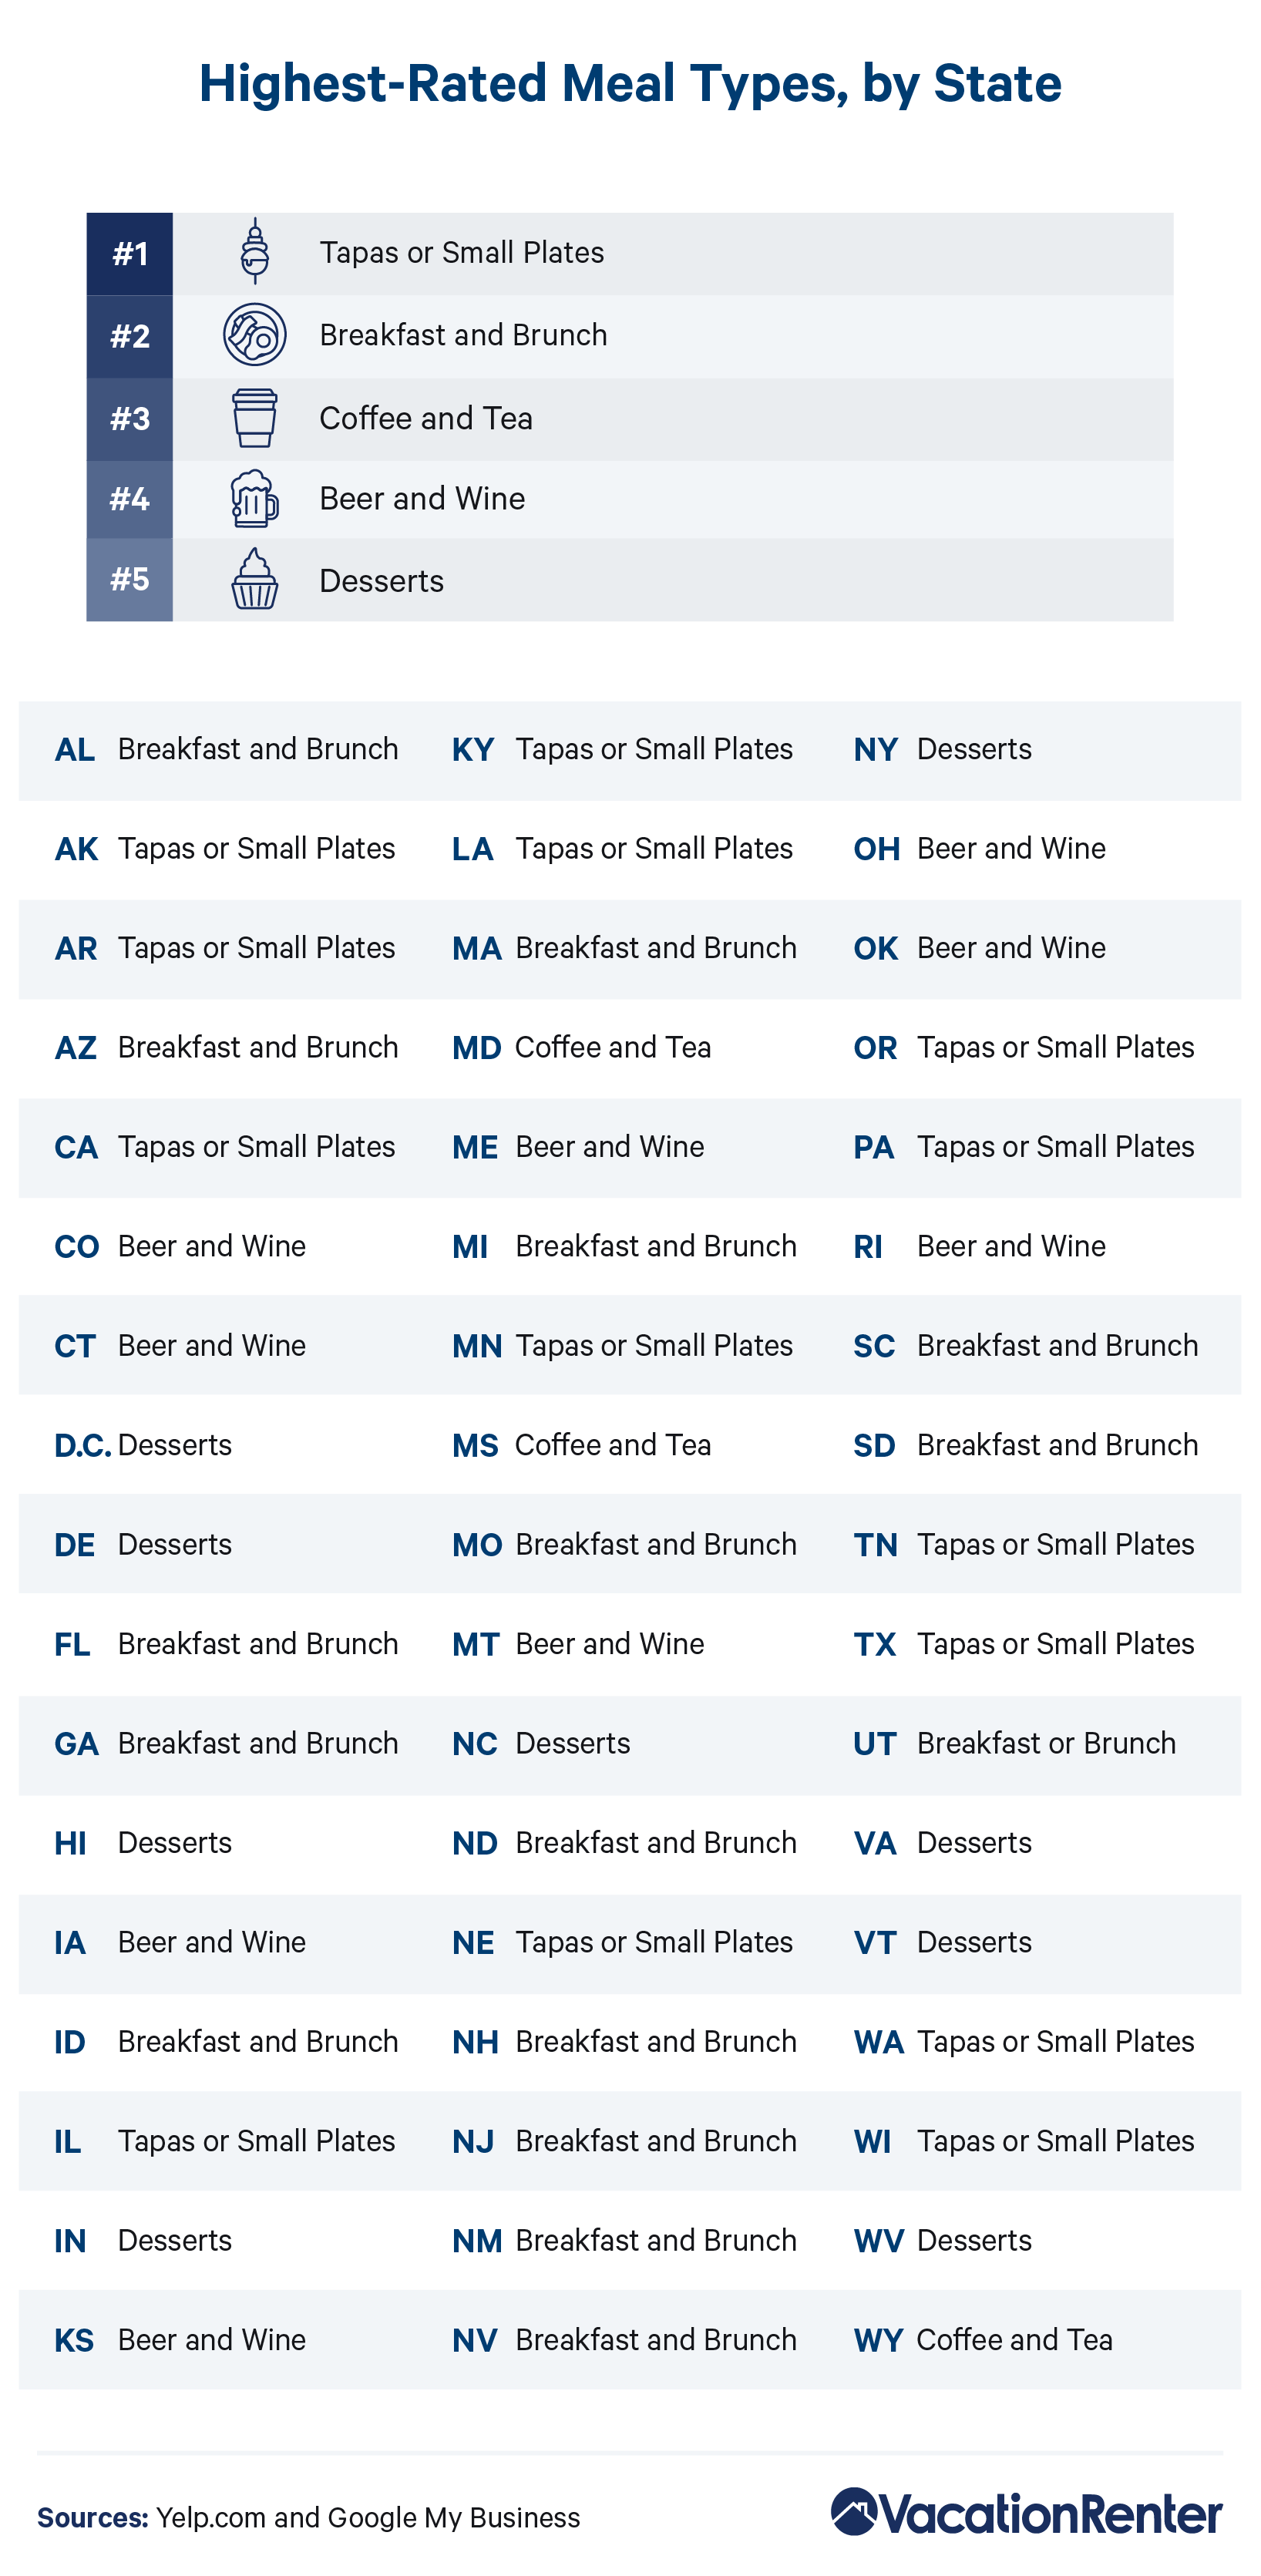 A list of U.S. states and their top-rated meal types, according to traveling foodies